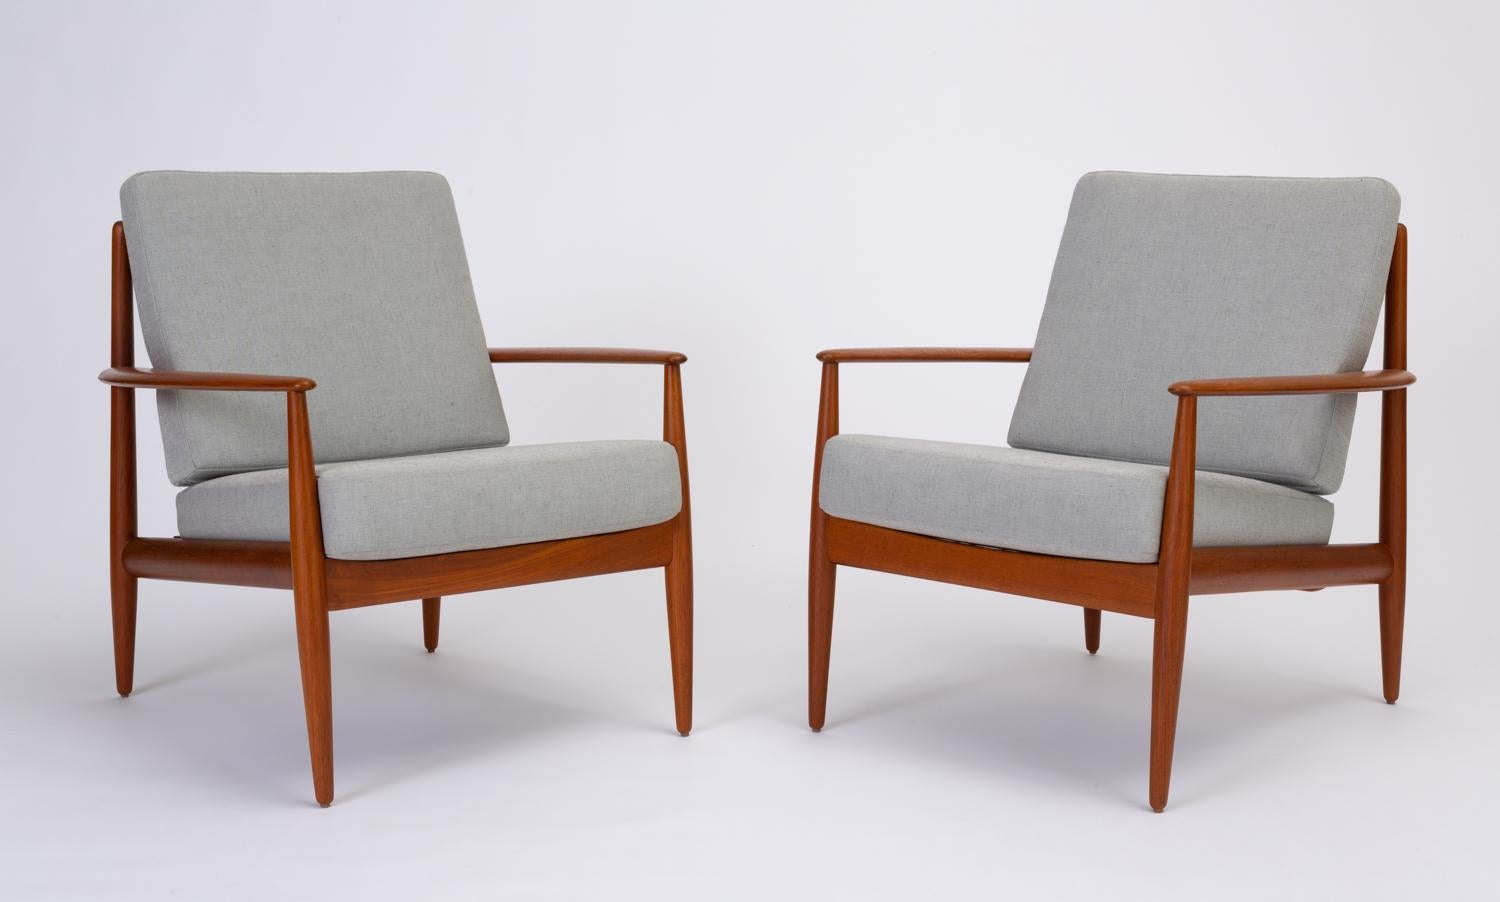 An elegant pair of Model 128 lounge chairs designed by Grete Jalk for France & Son in 1963. The chair has an elongated seat framed by broad, boomerang-reminiscent armrests. The open back of the chair is described by four organically curved slats.